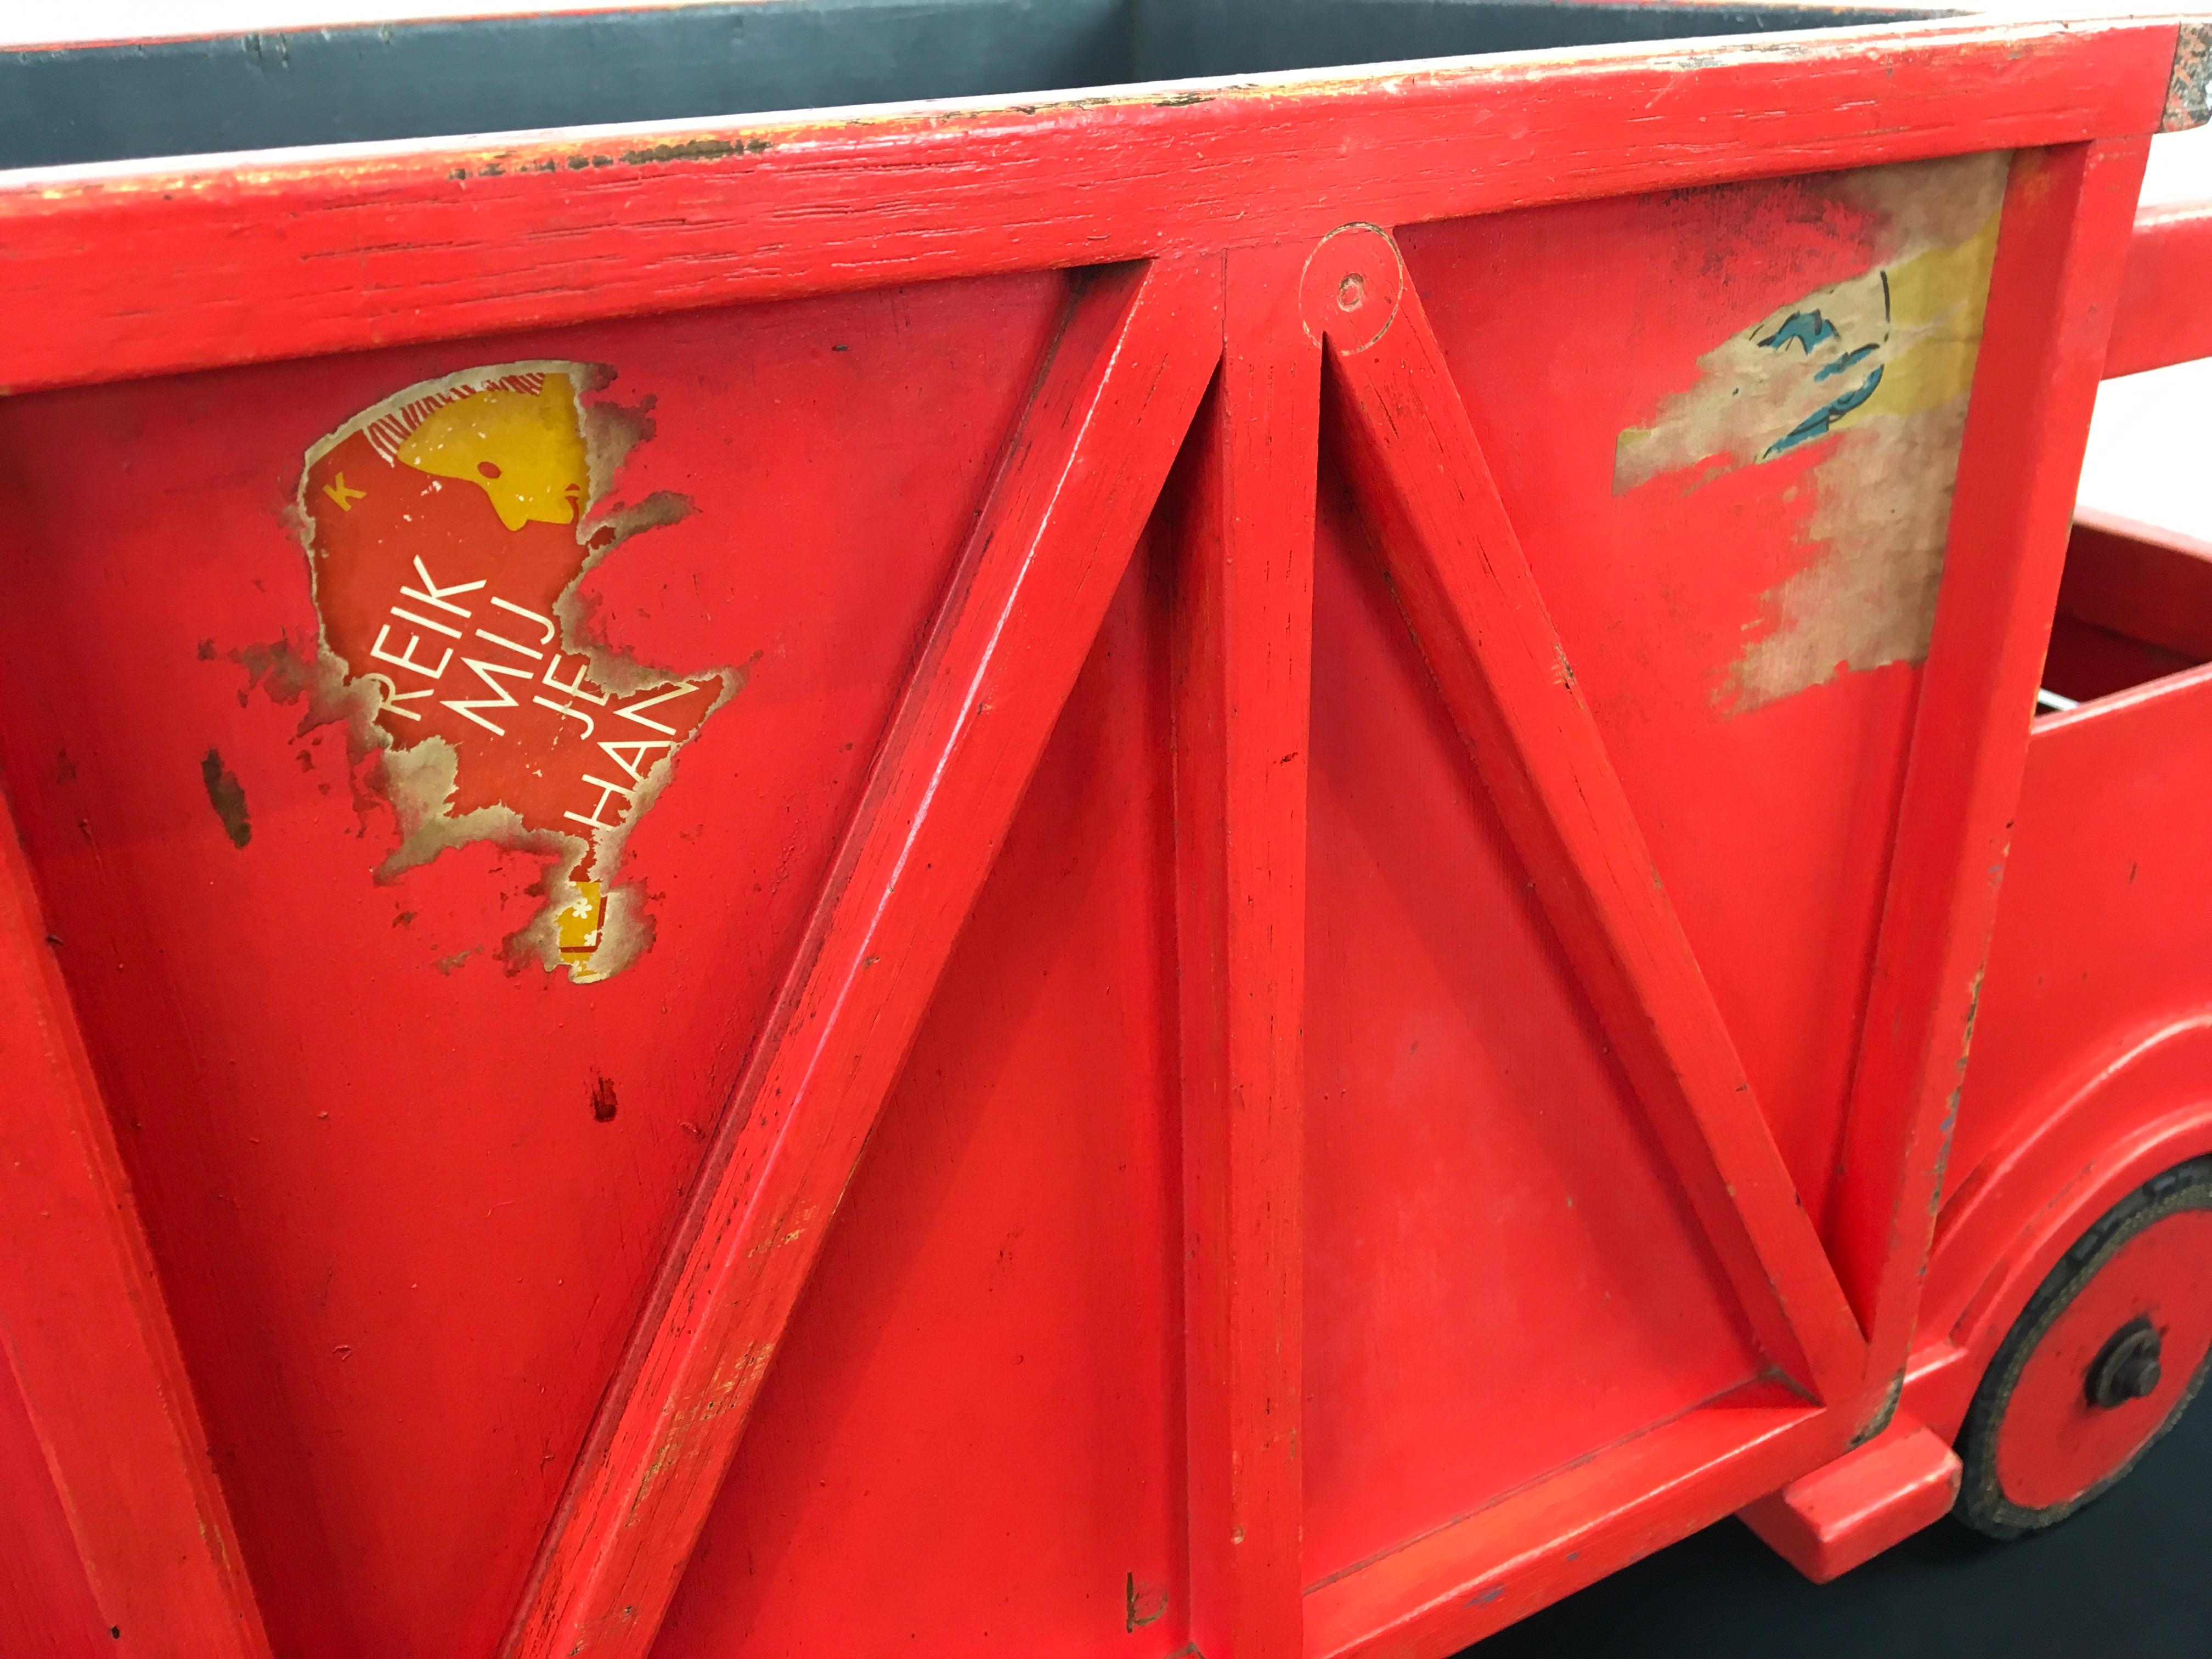 Hand-Painted XL Red Wooden Dump Truck Toy, 1950s For Sale